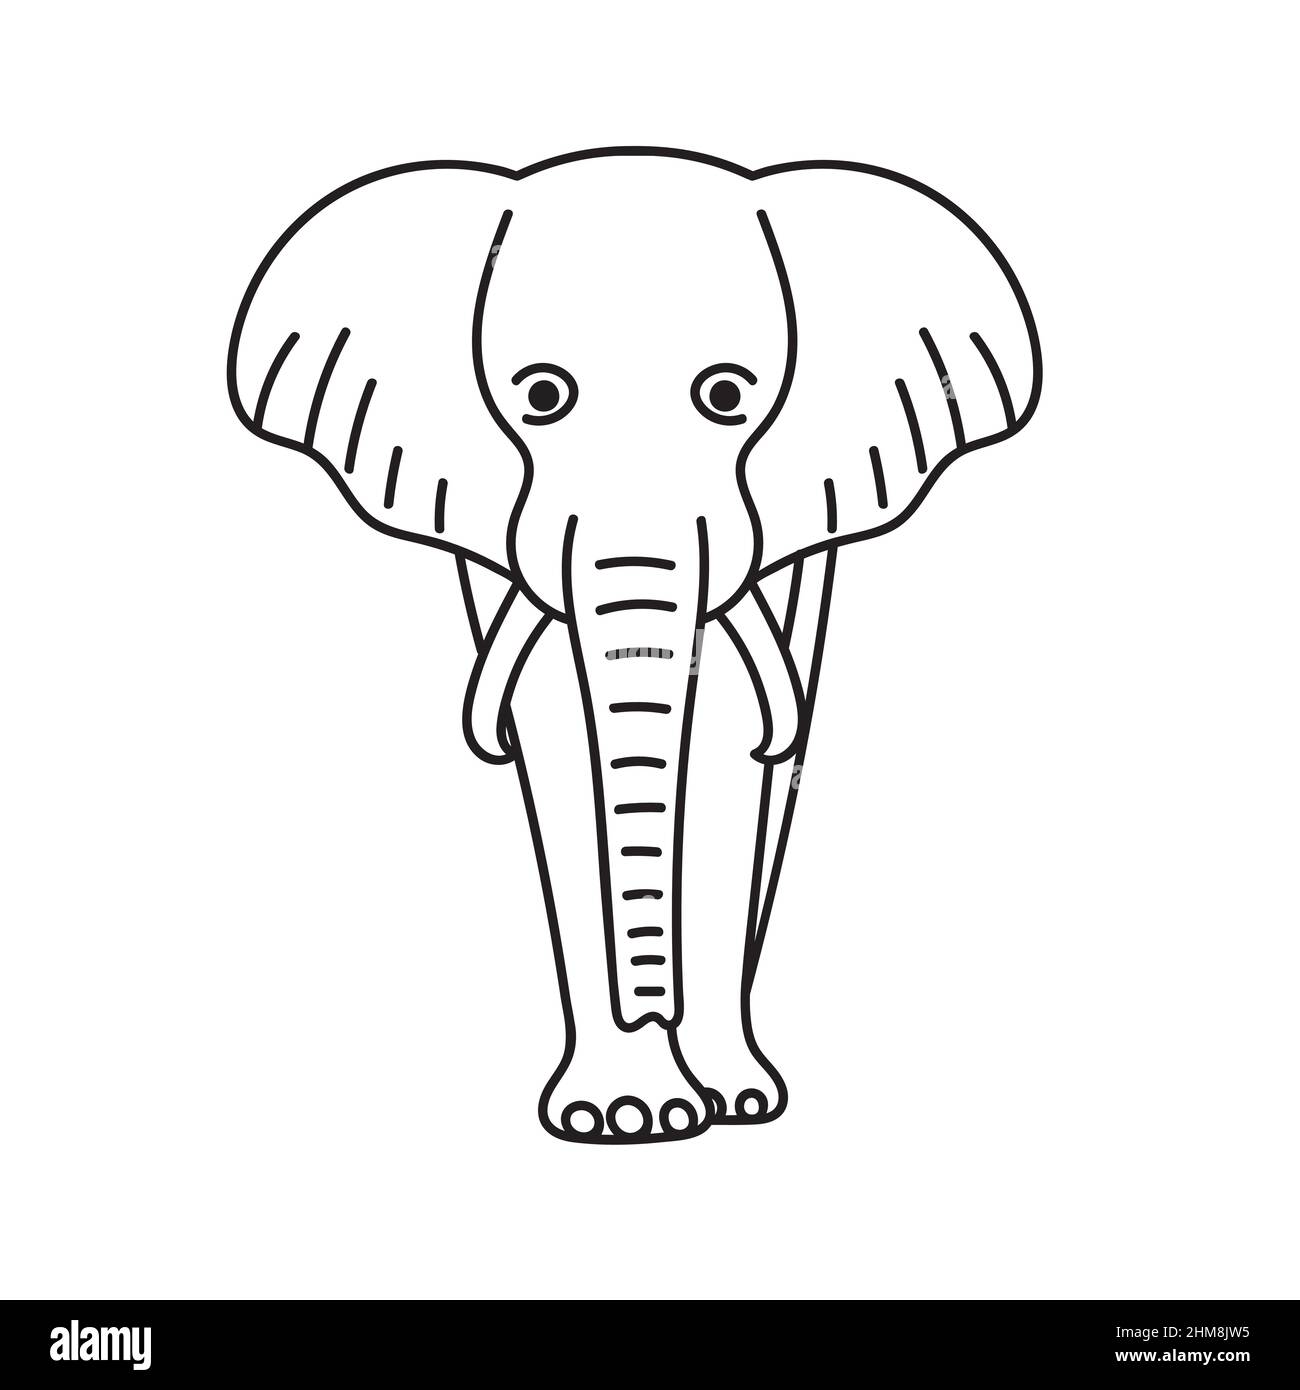 indian asian elephant, vector doodle illustration, contour drawing ...